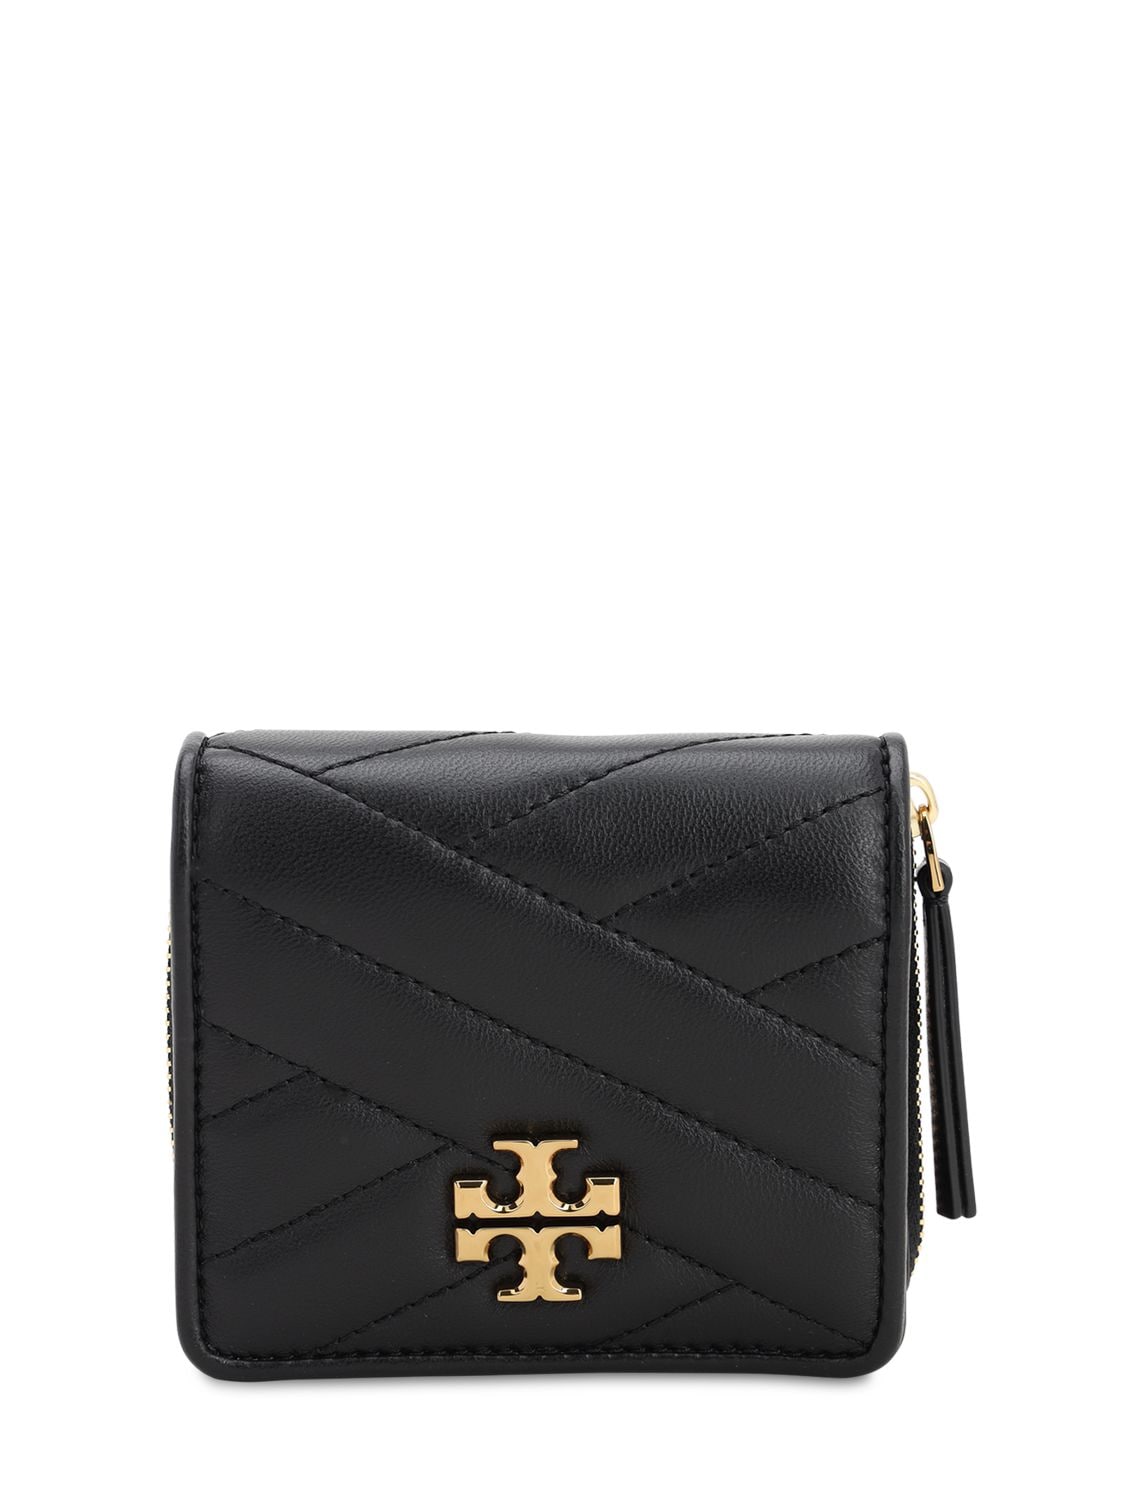 Tory Burch Kira Quilted Leather Compact Wallet In Black